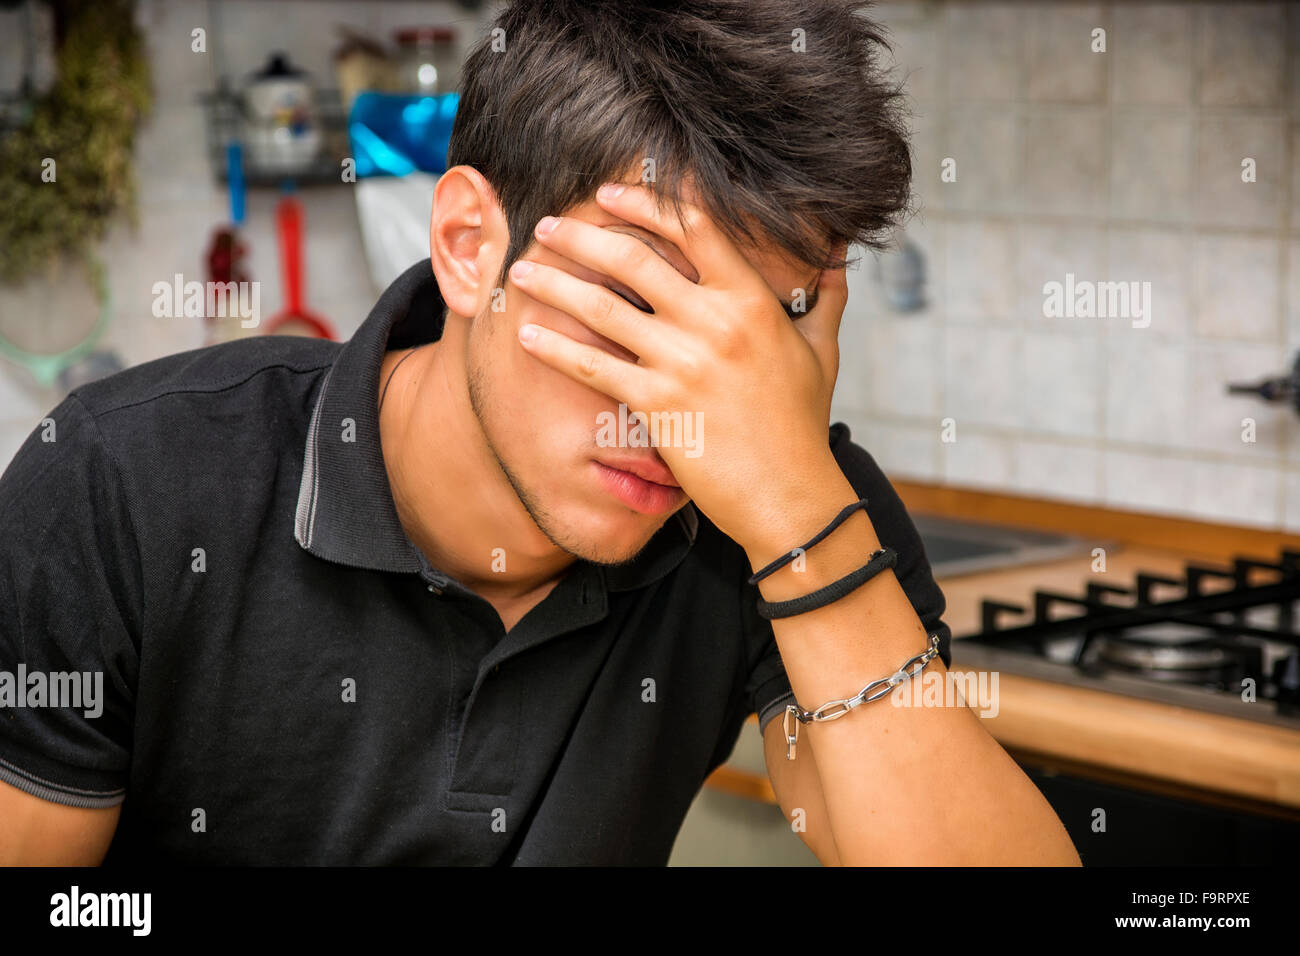 Depressed man hiding face with hand while sitting in the kitchen Stock Photo